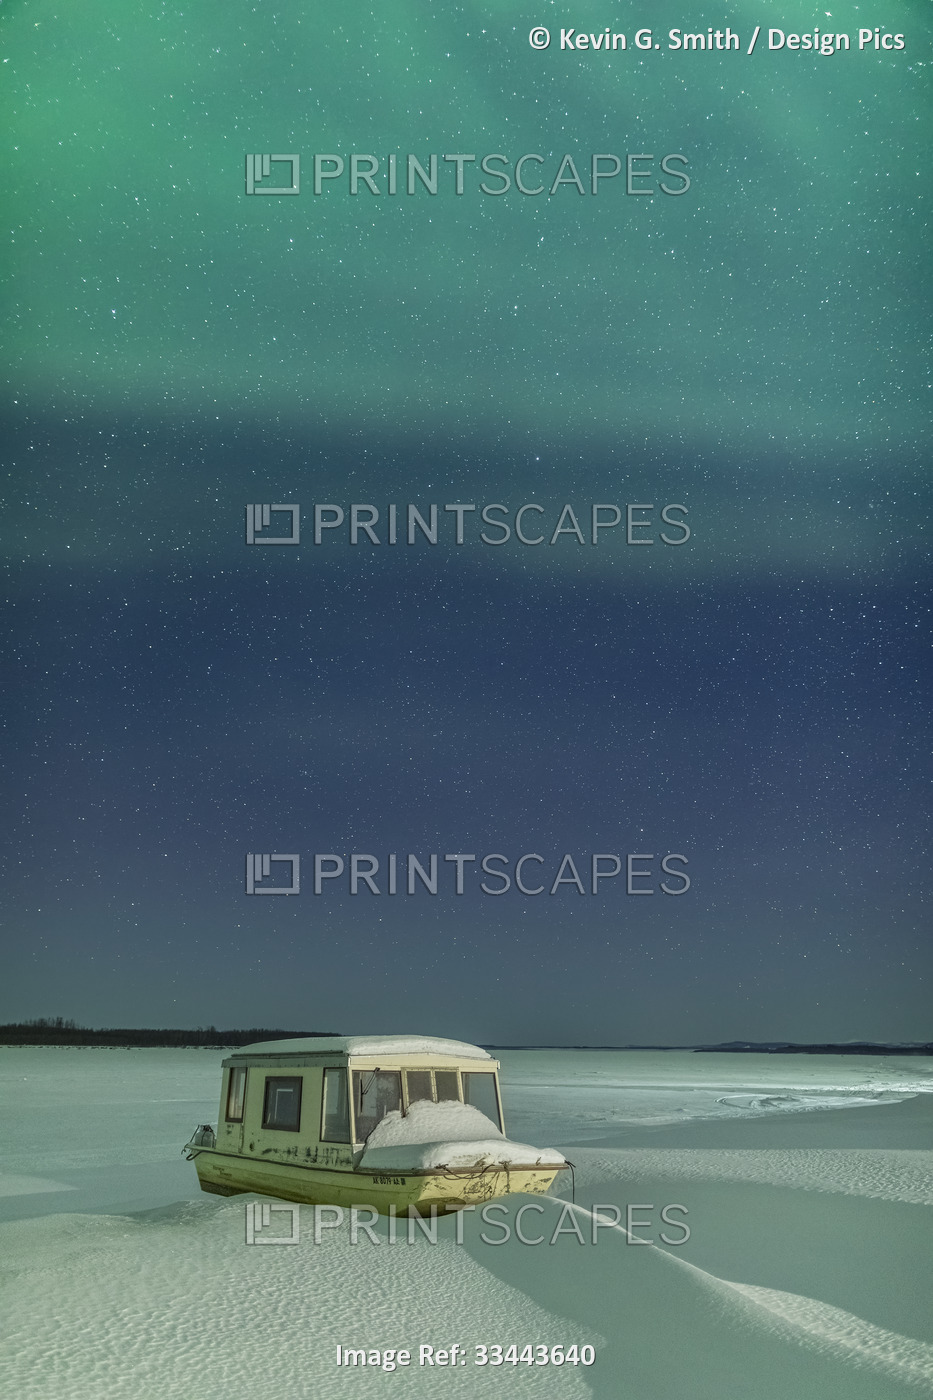 Northern Lights in the sky above a fishing boat pulled up on the shore of the ...